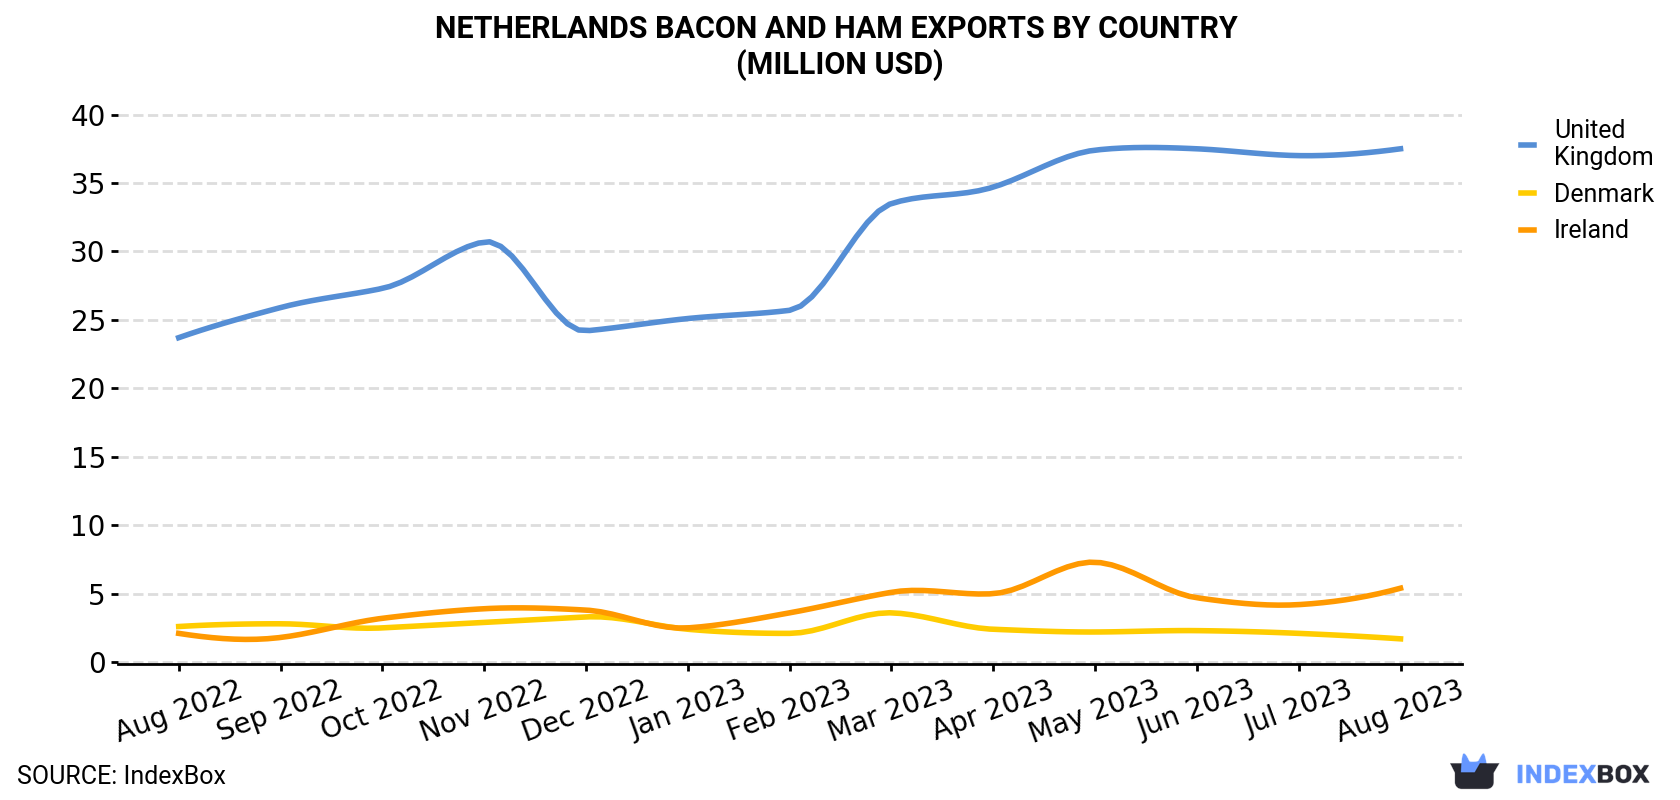 Netherlands Bacon And Ham Exports By Country (Million USD)